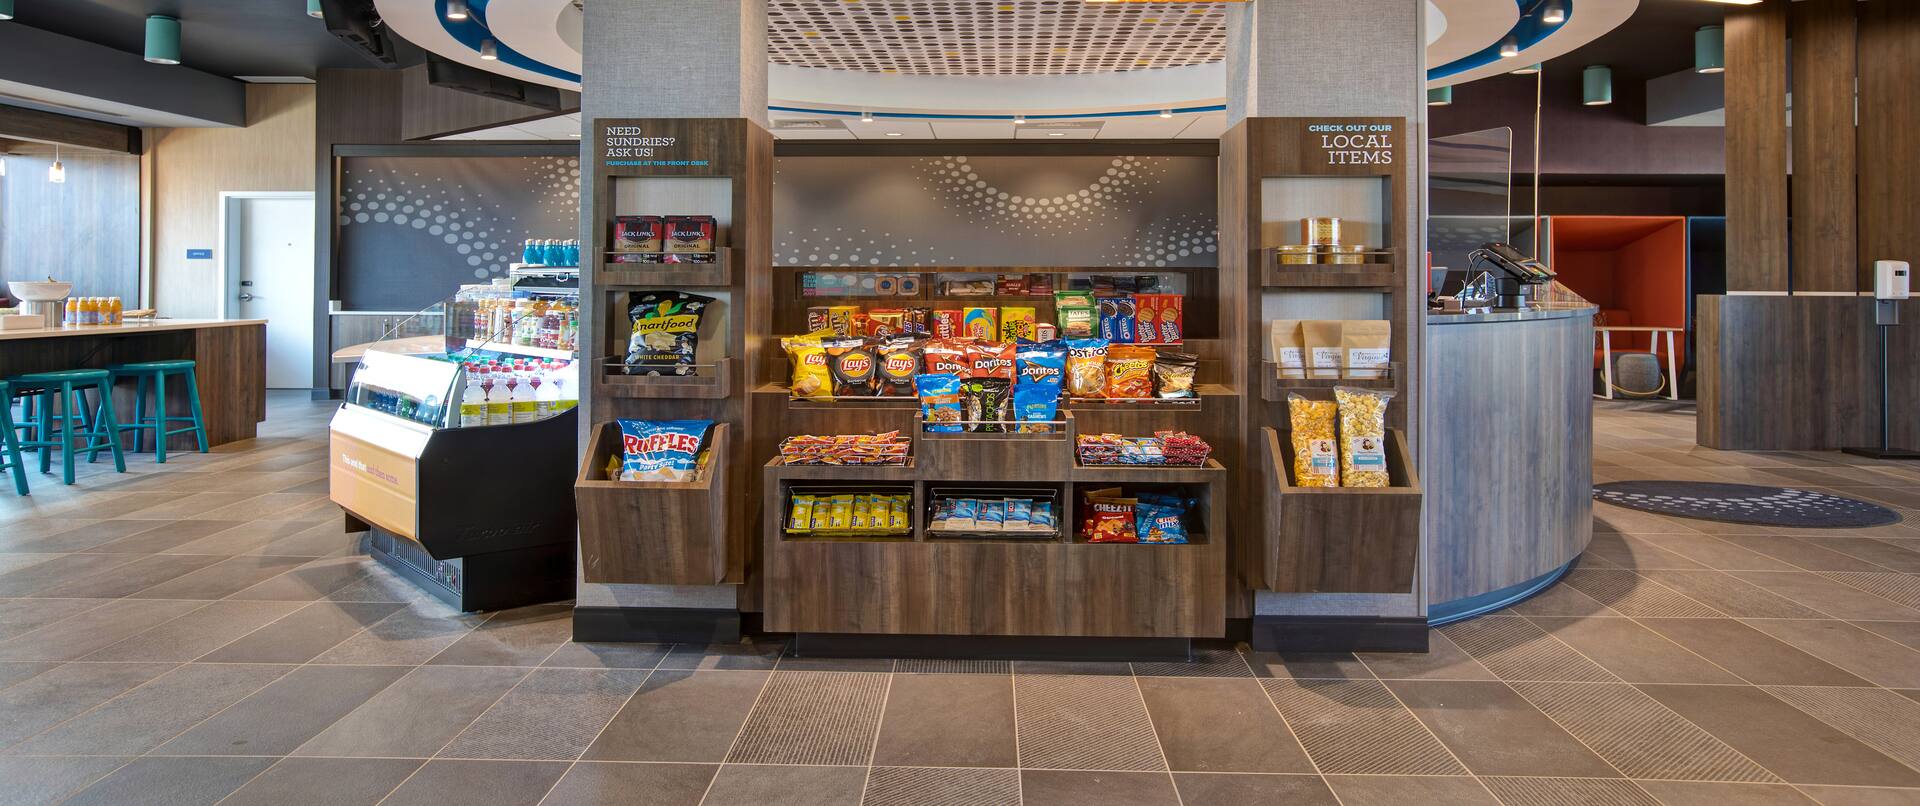 lobby front desk with snack shop